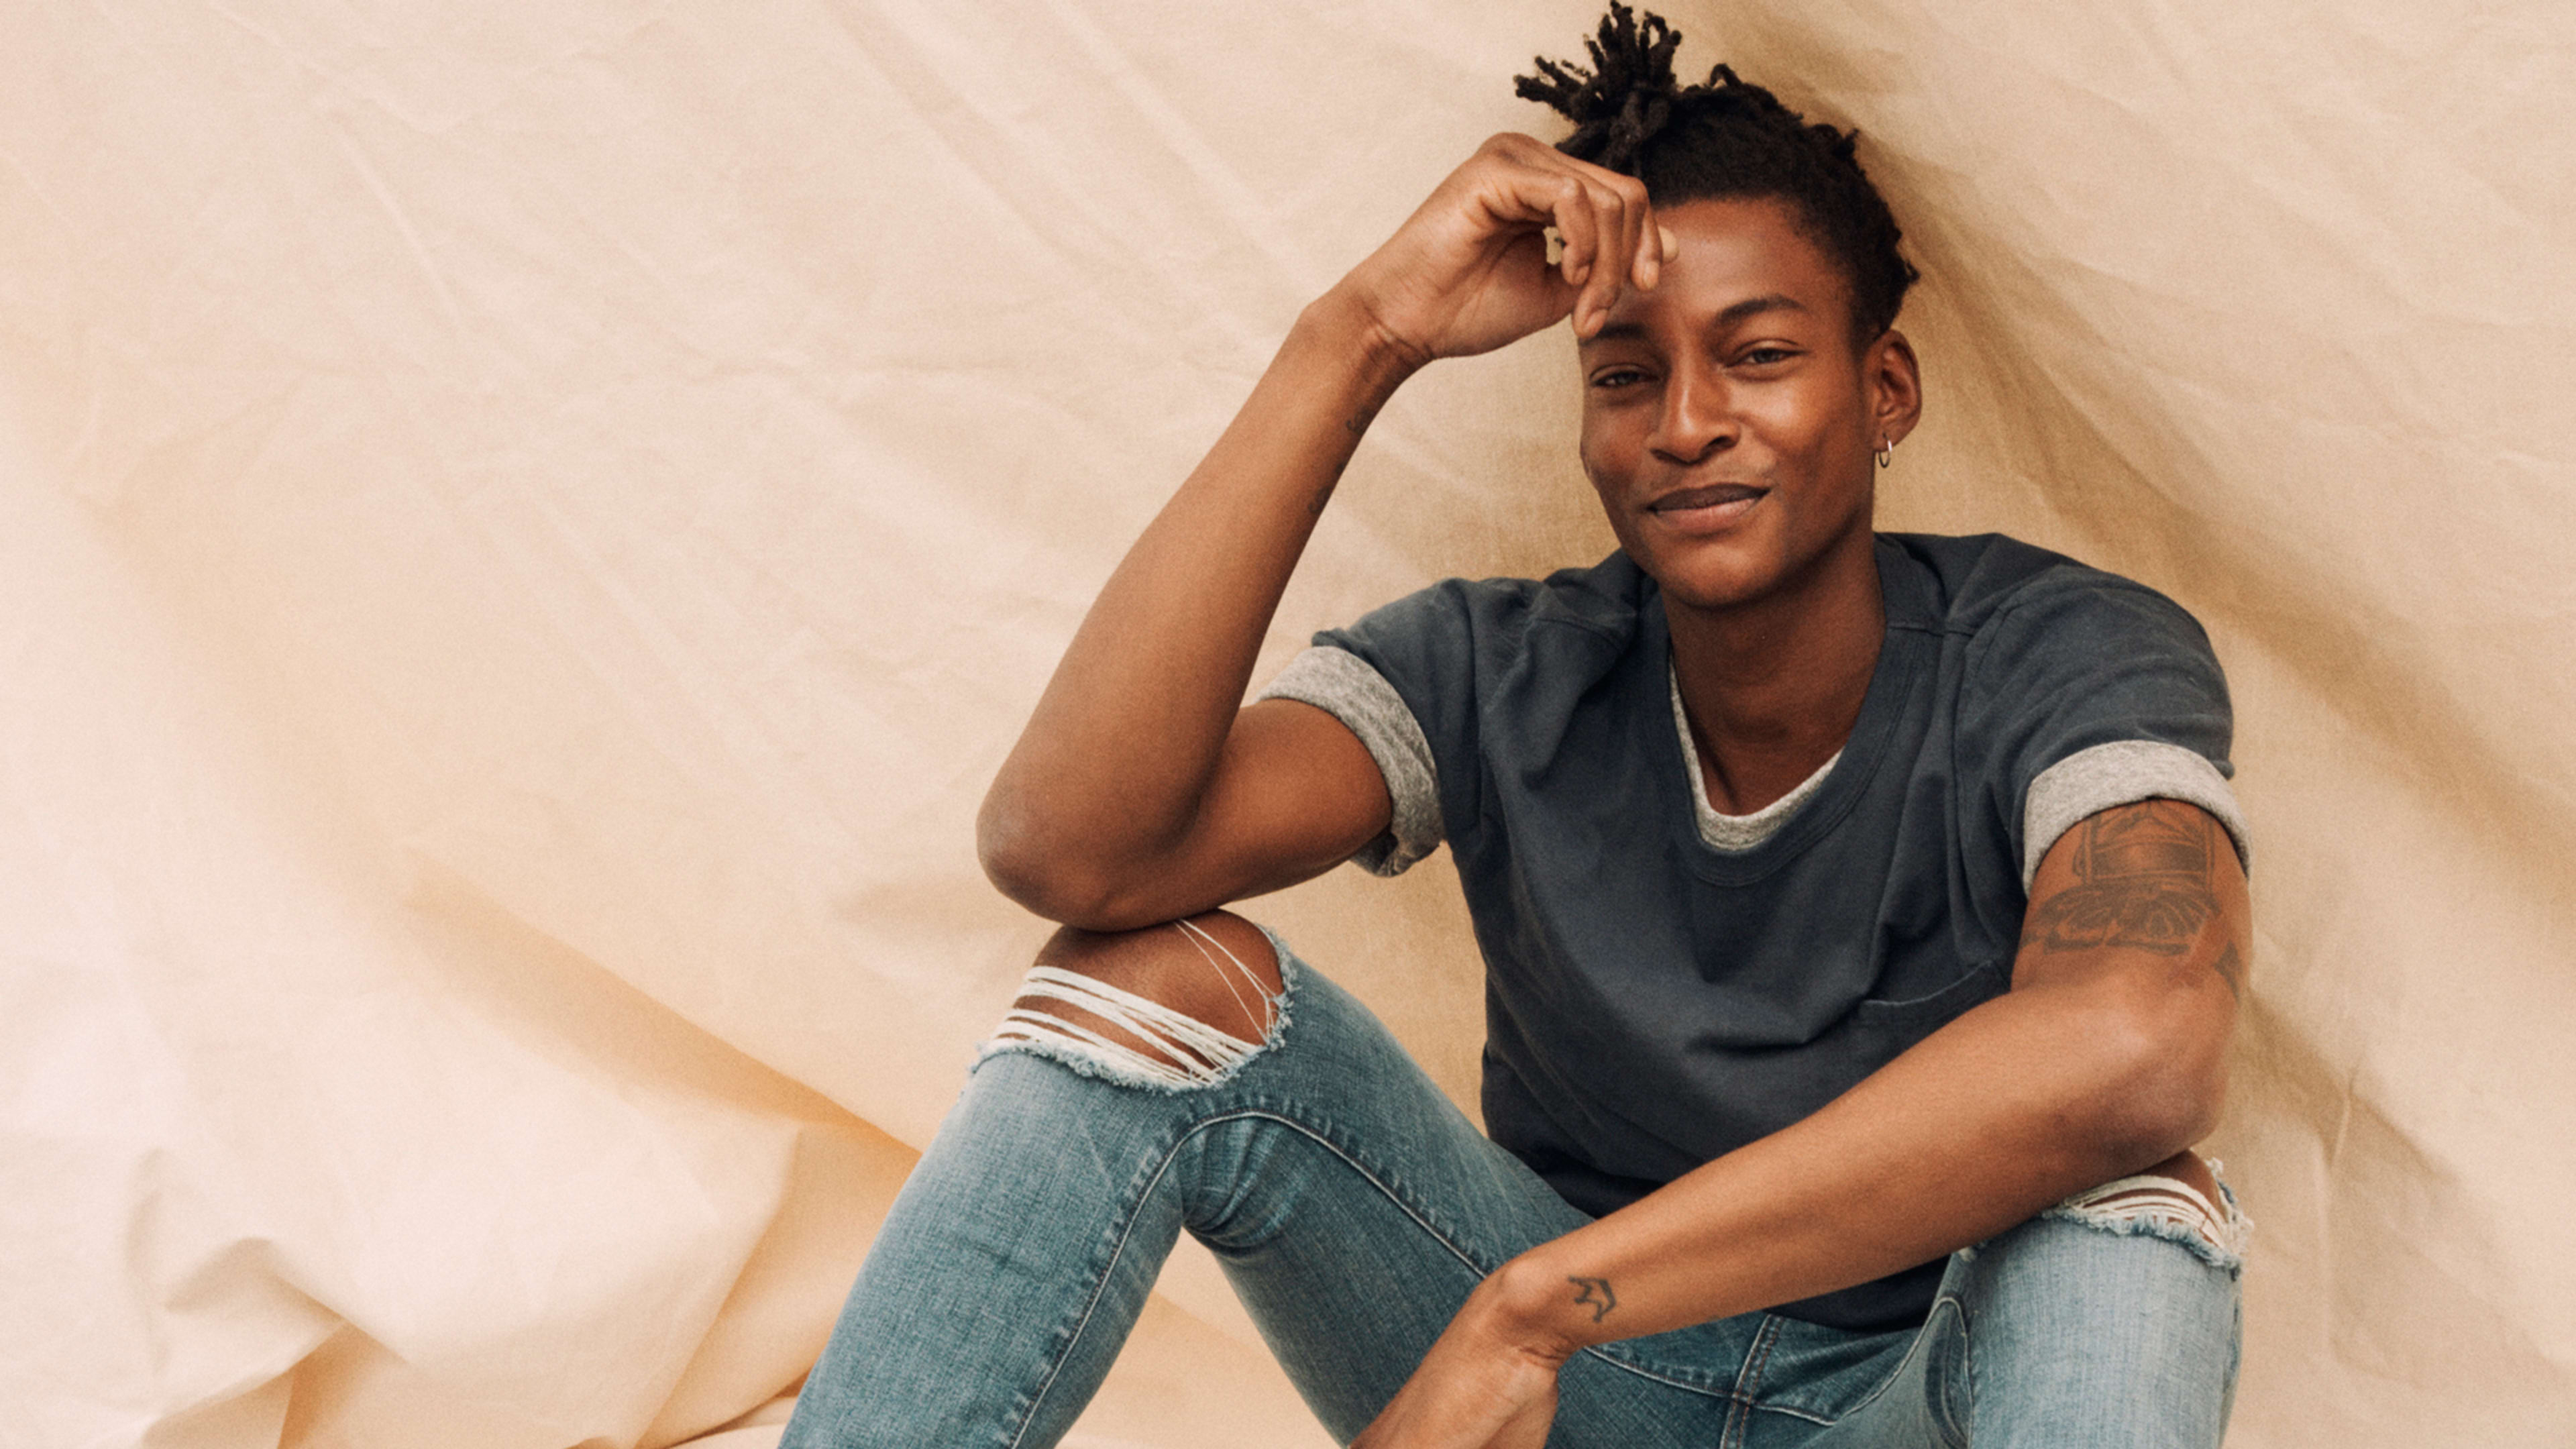 Madewell just launched a menswear line